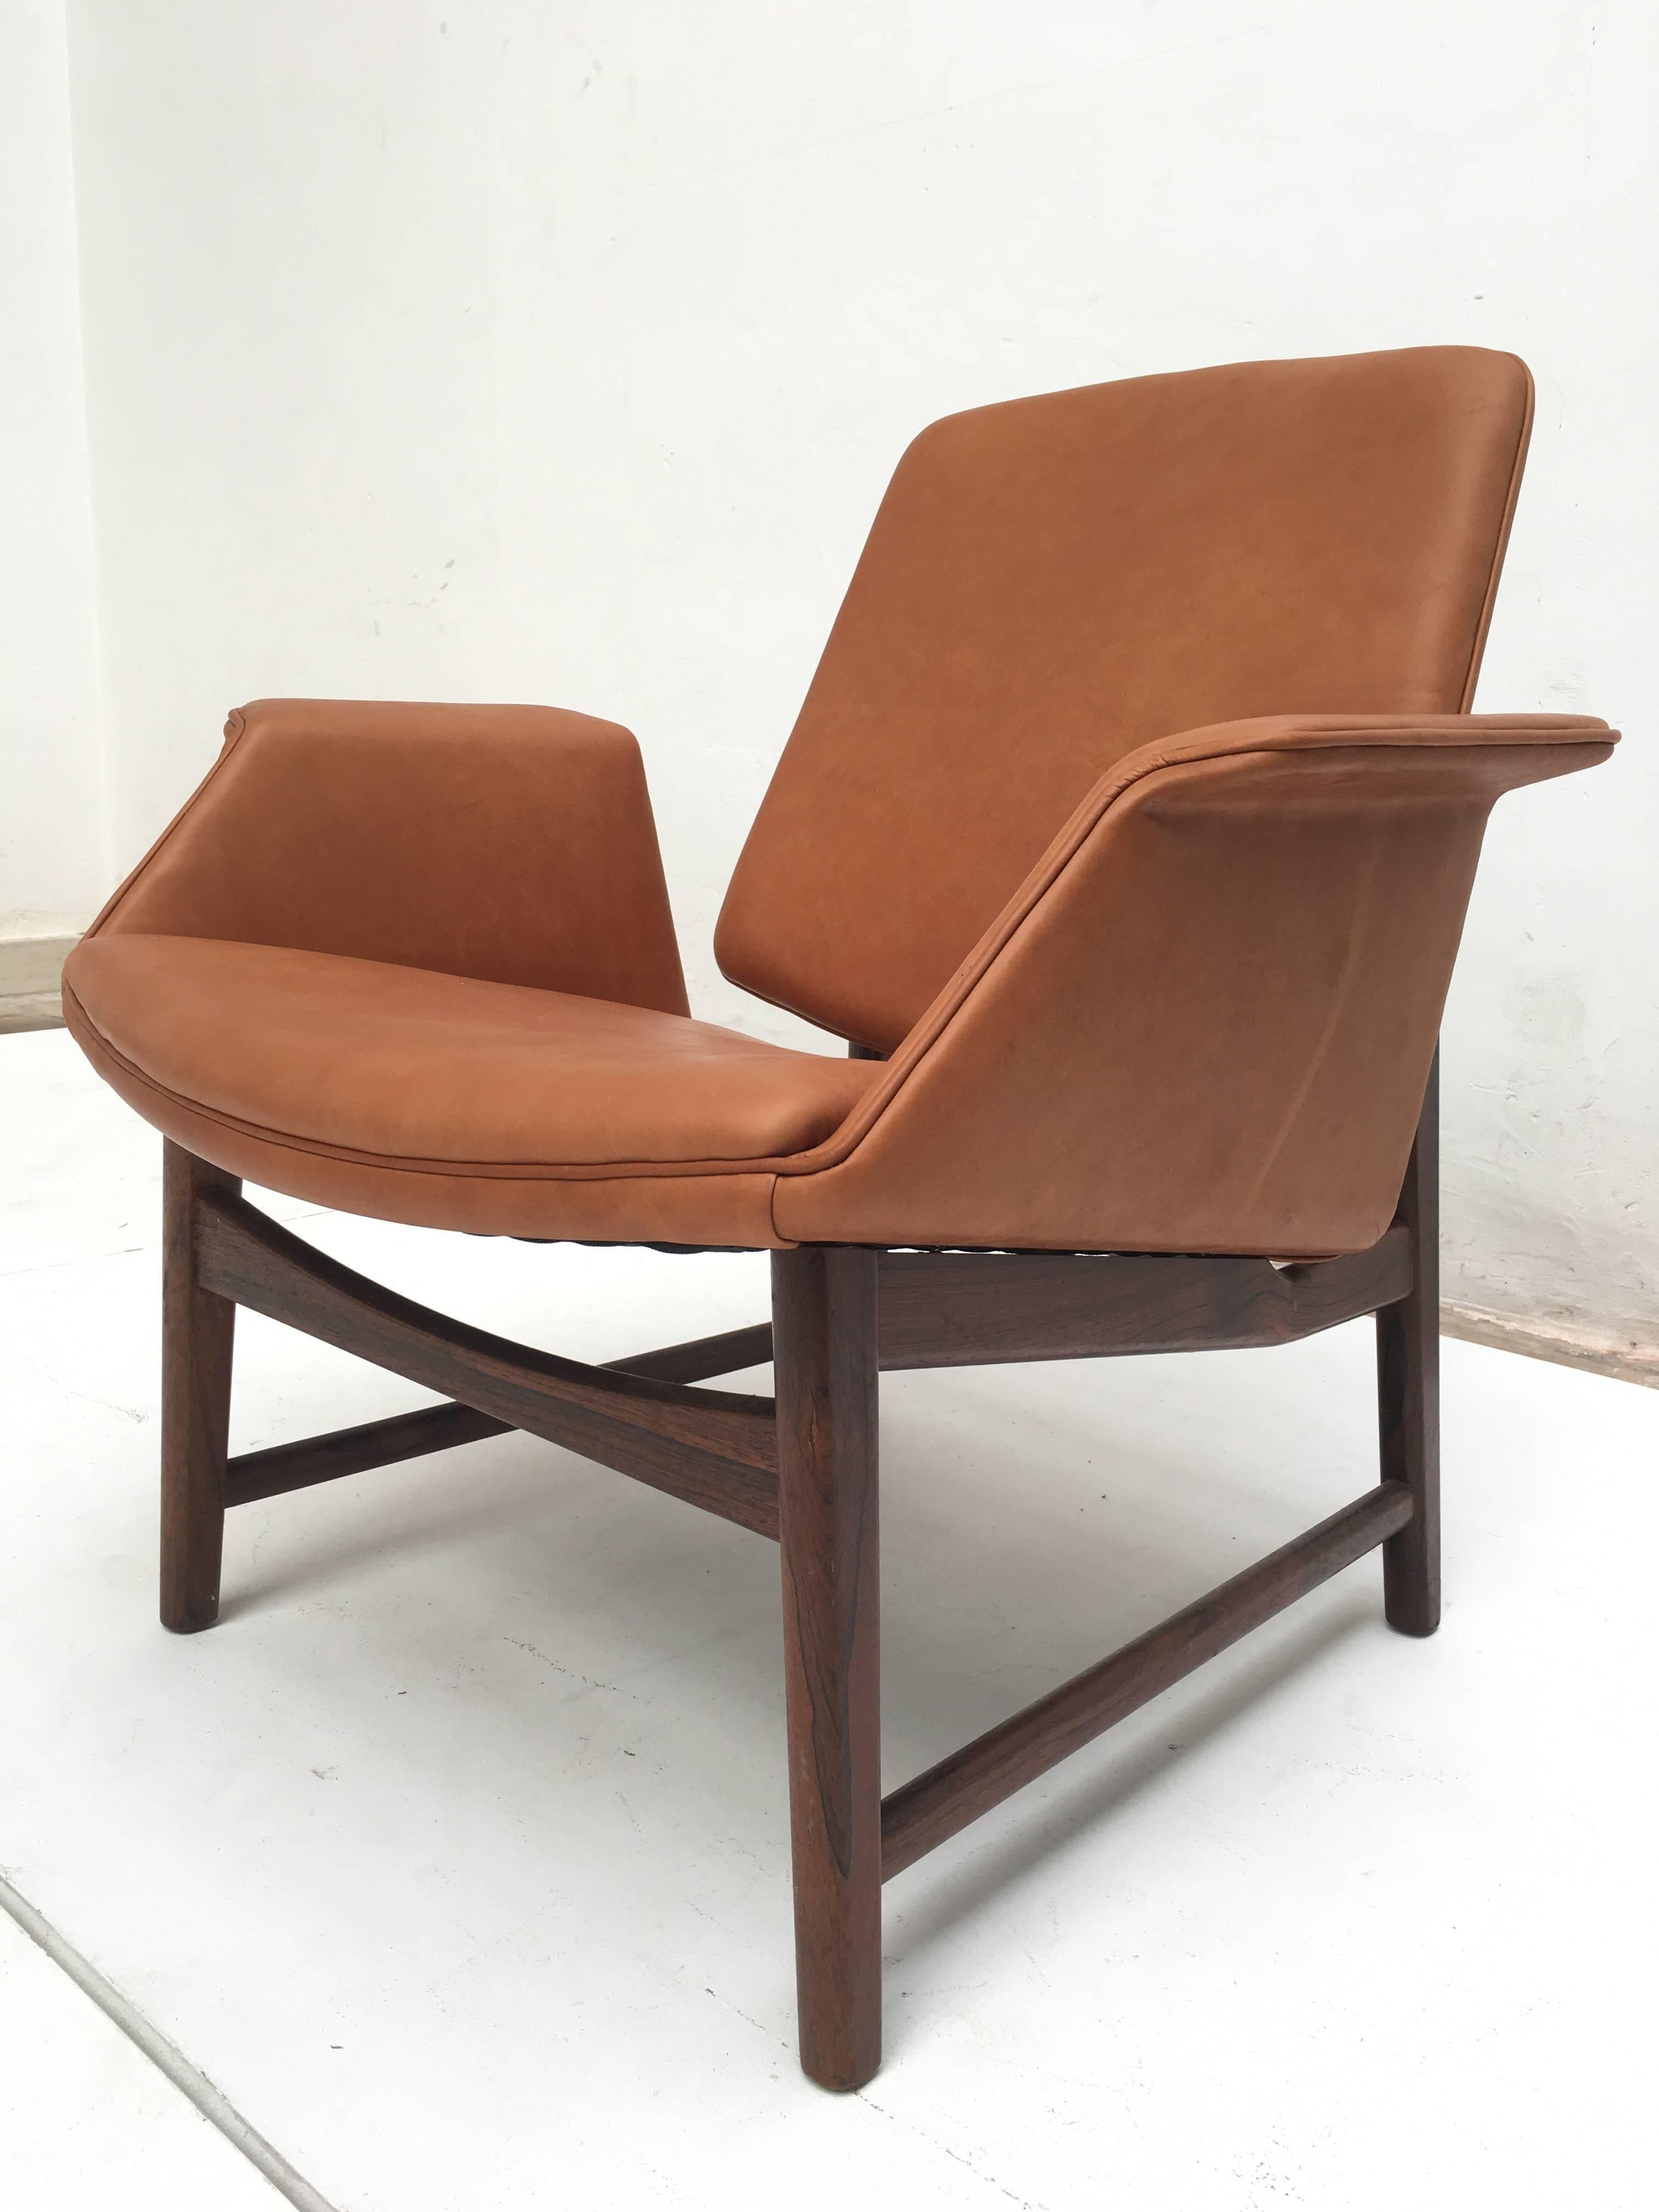 A very rare model by Danish designer Hans Olsen 

This example has undergone a complete restoration of its upholstery including new original specification Pirelli rubber webbing and new high quality and period authentic latex foam which is expensive